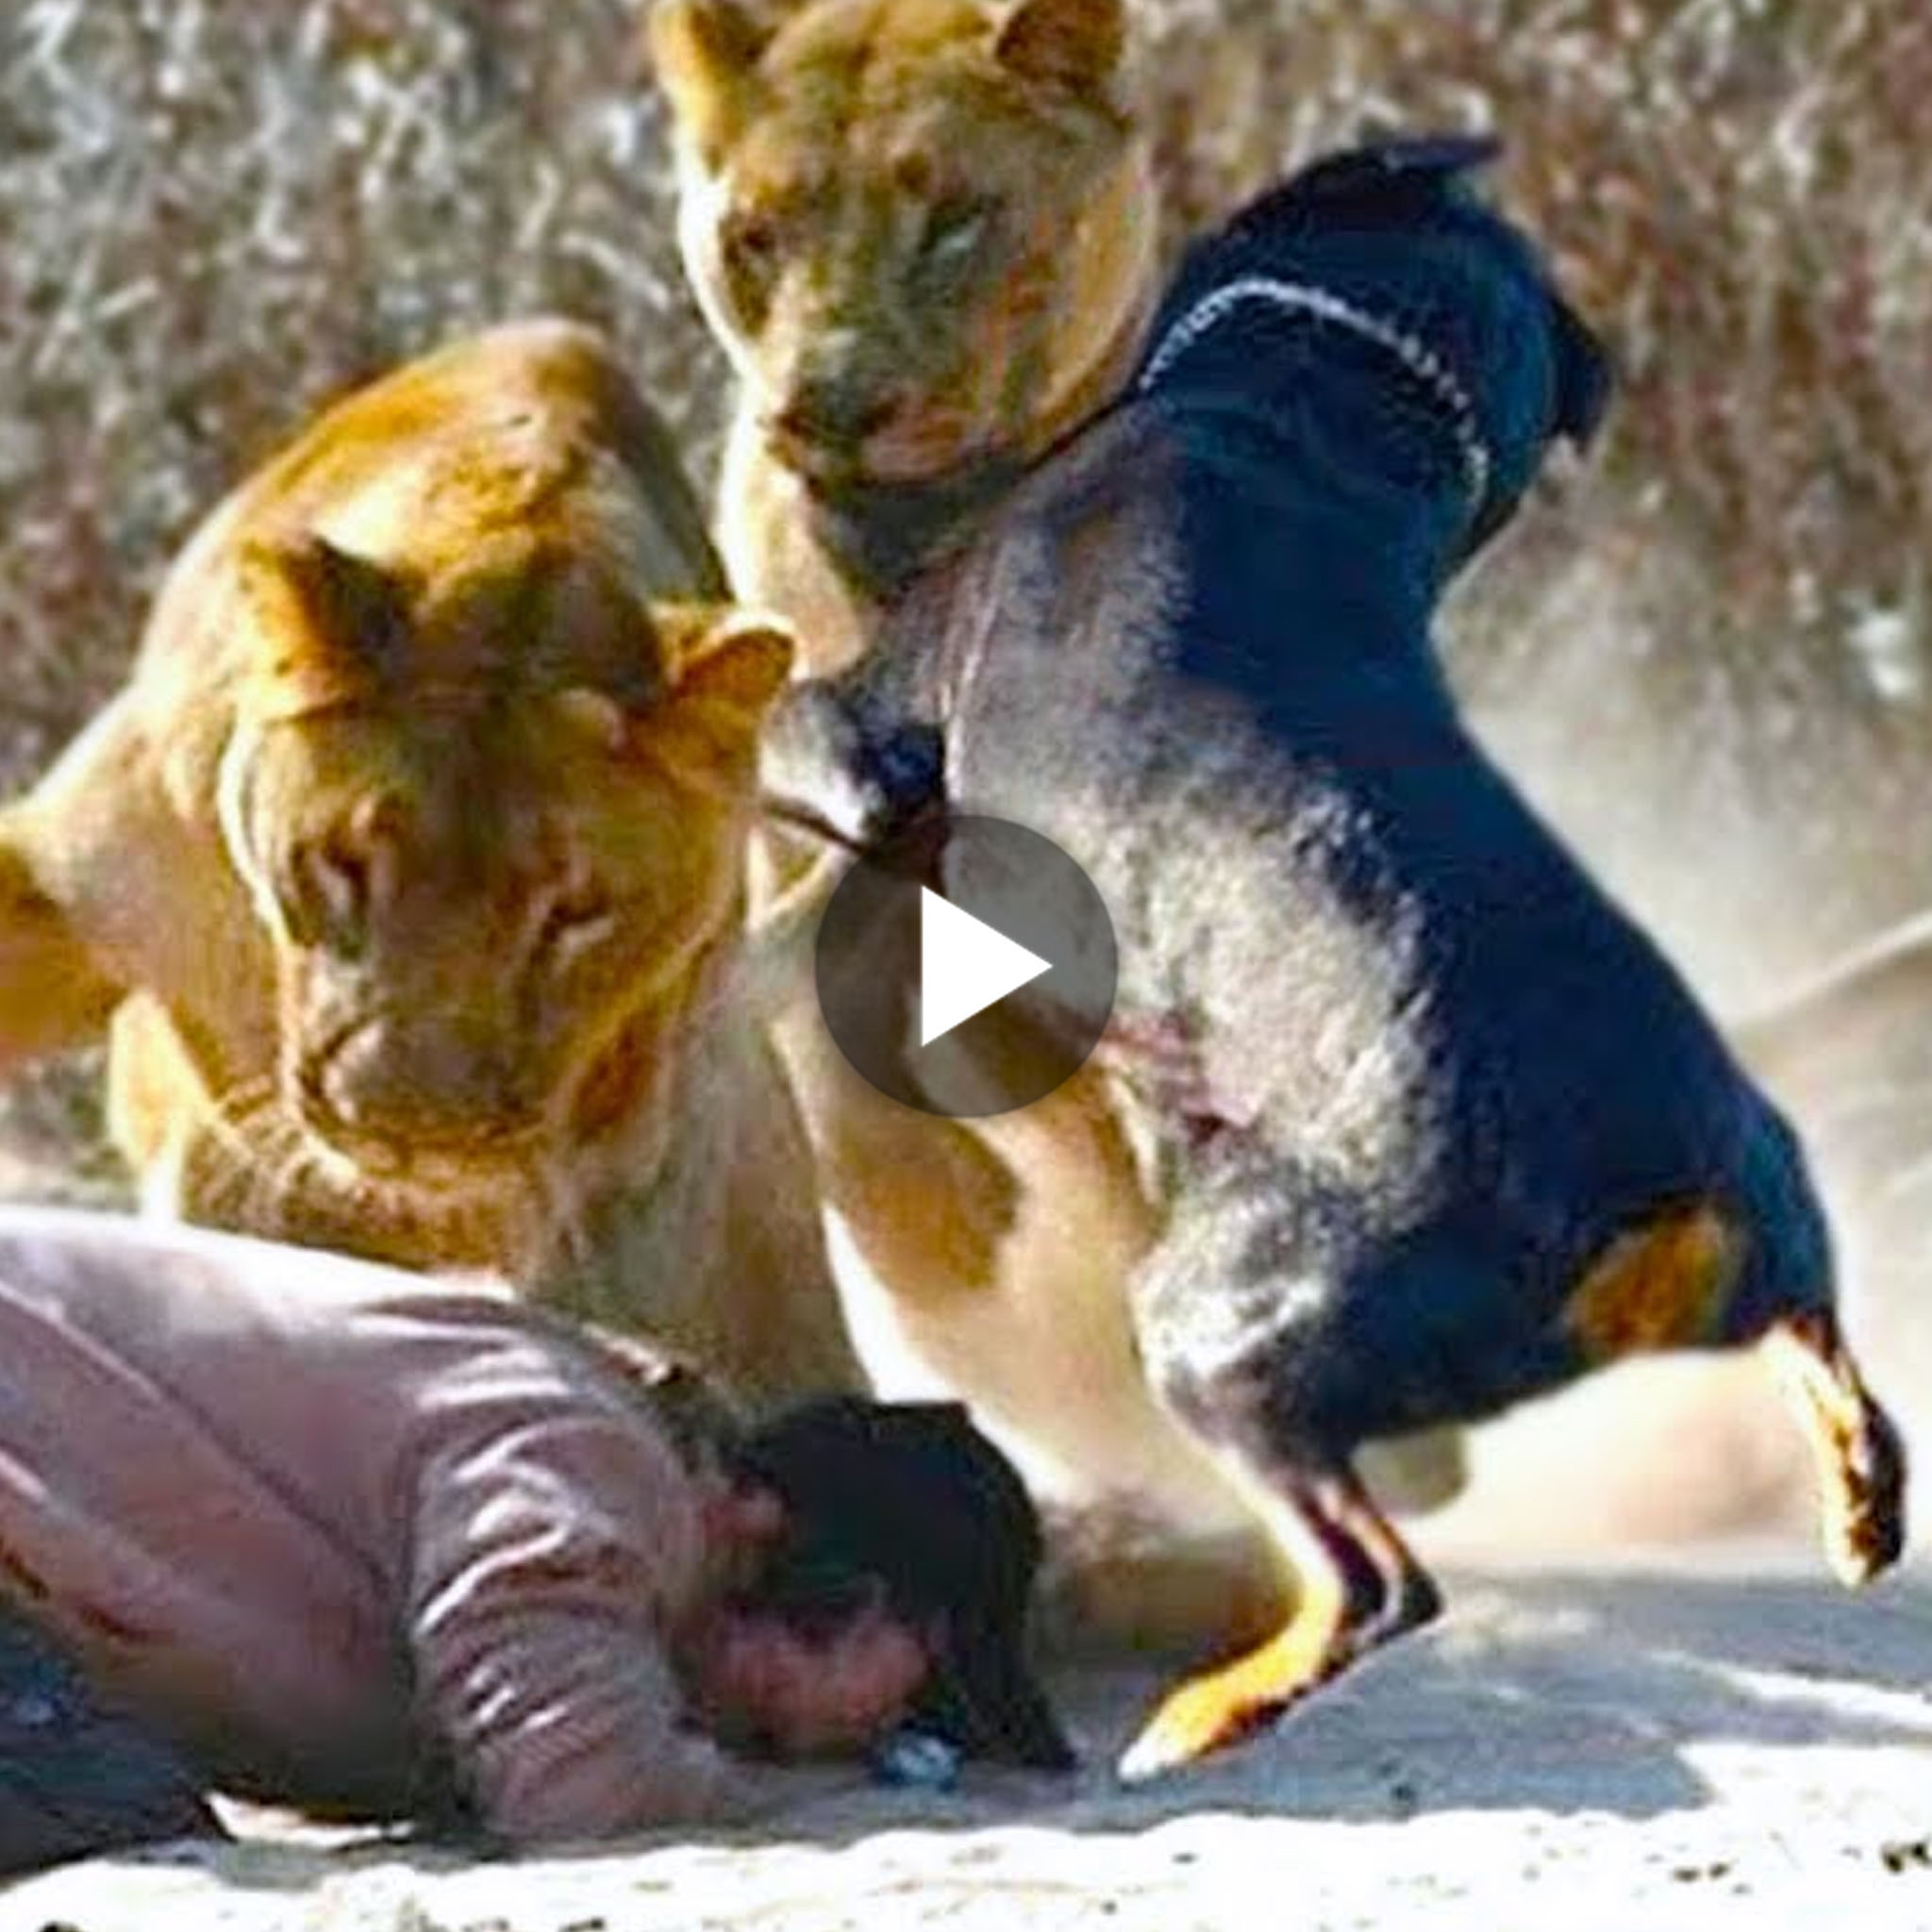 tho “Incredible Acts of Courage: Brave the Dog Faces Two Lions to Save the Life of Owner’s Beloved, Demonstrating Unwavering Loyalty, Making Netizens Appreciate the Dog’s Heroism.” tho